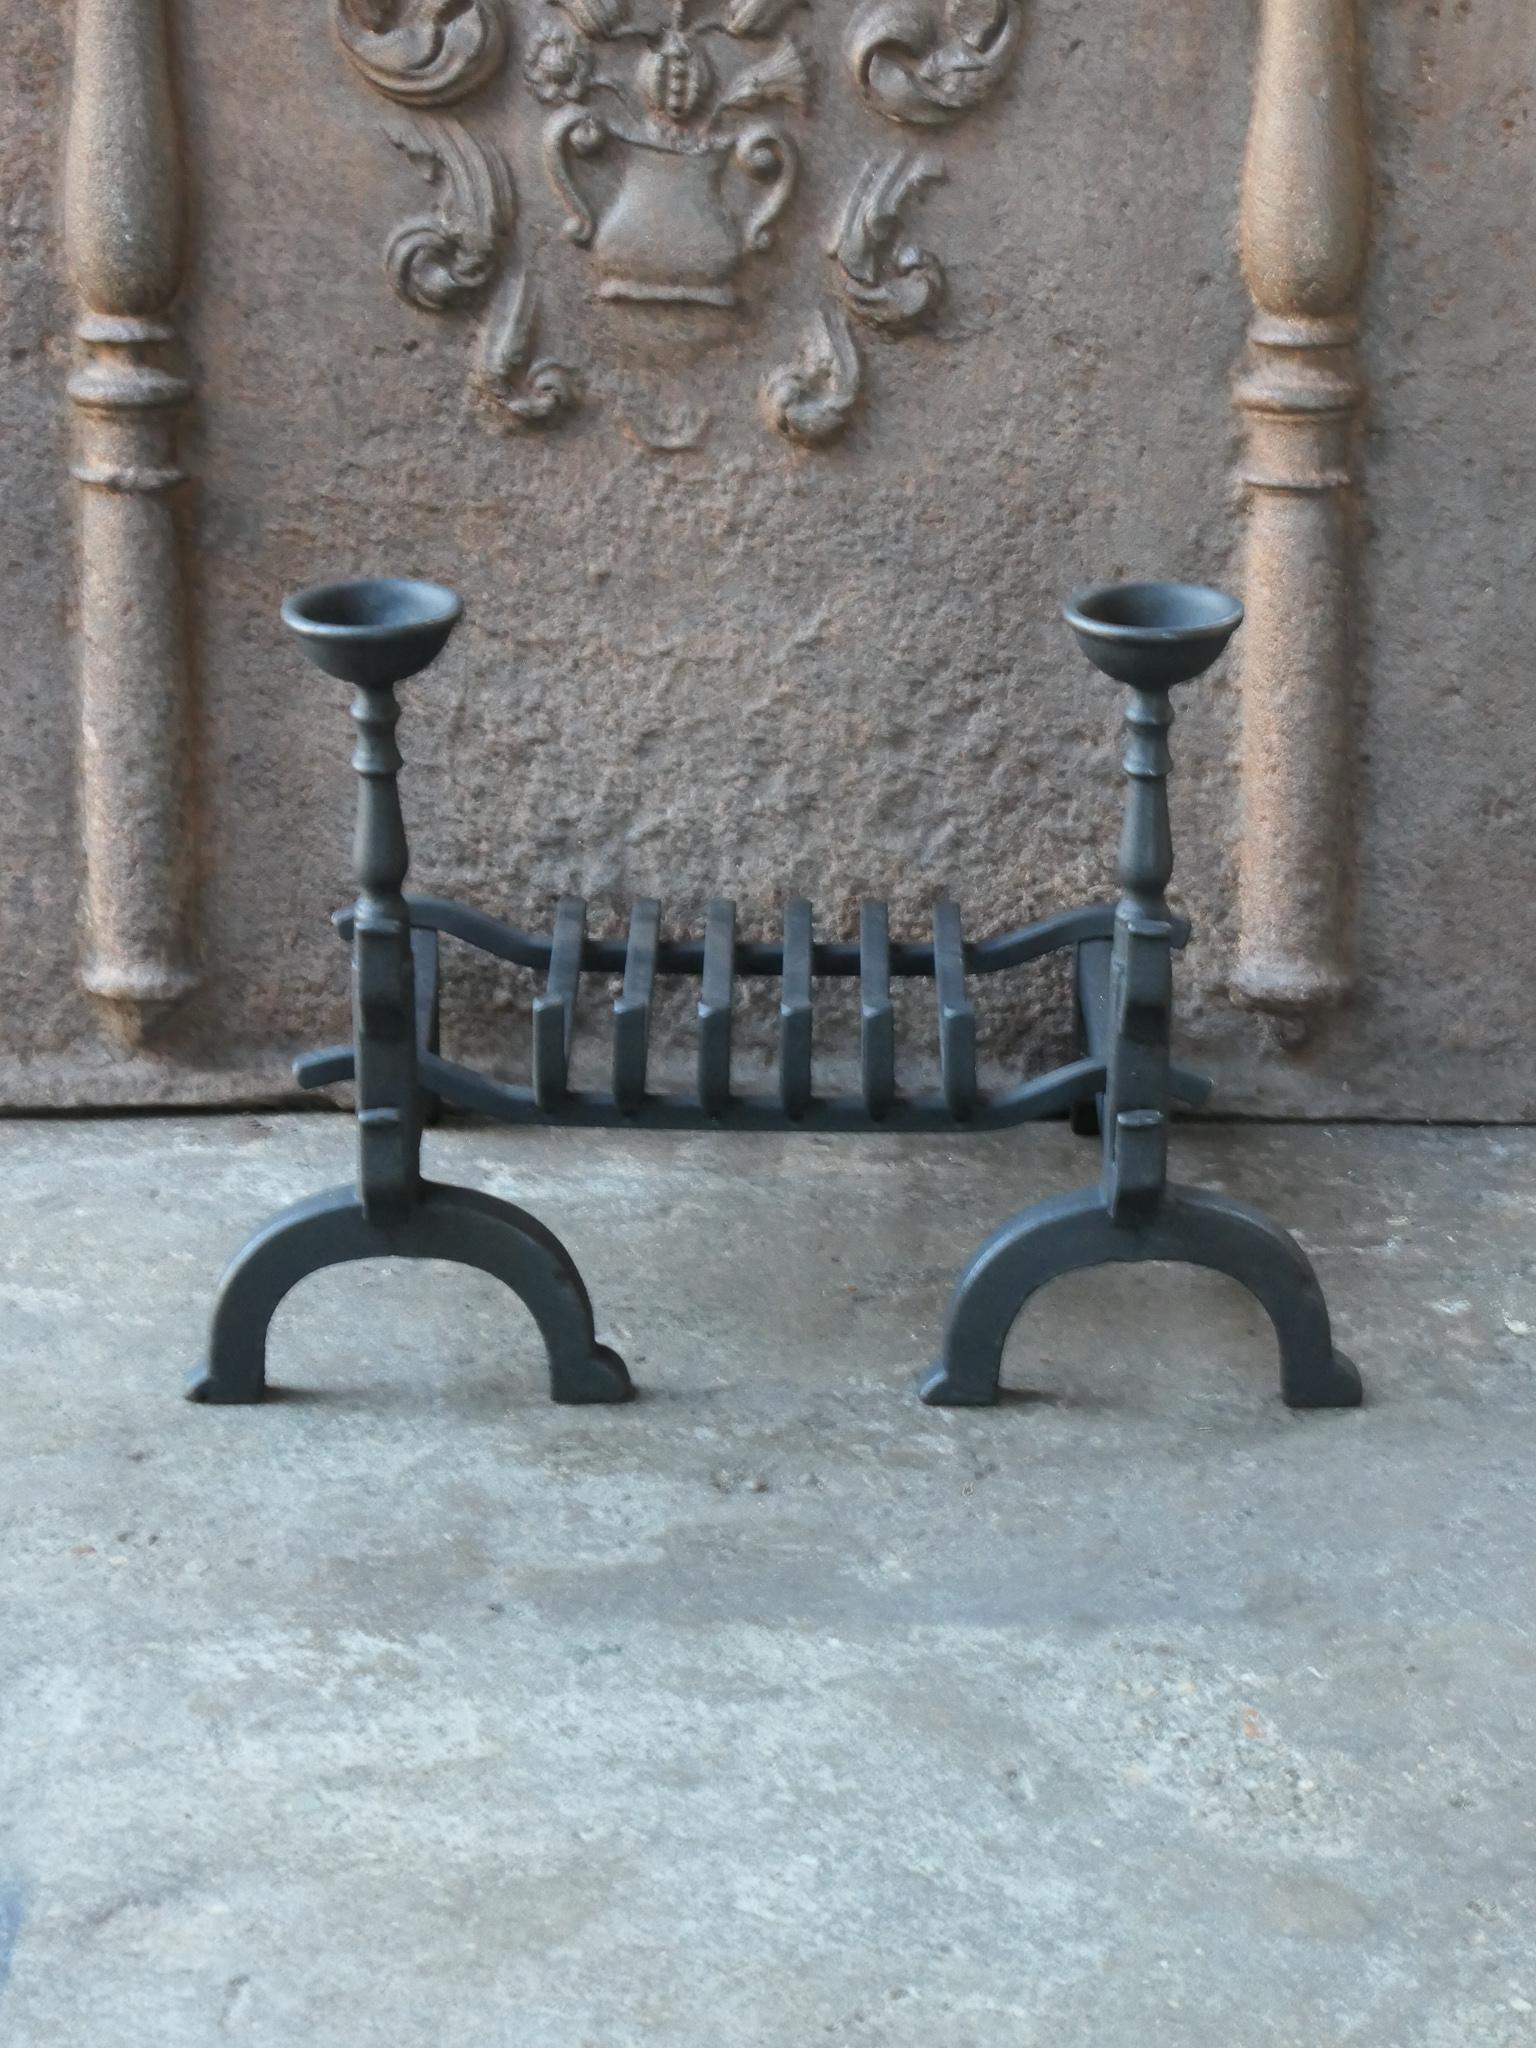 19th - 20th century French Neo-gothic fireplace basket - fire basket made of wrought iron and cast iron. The basket is in a good condition and is fully functional.